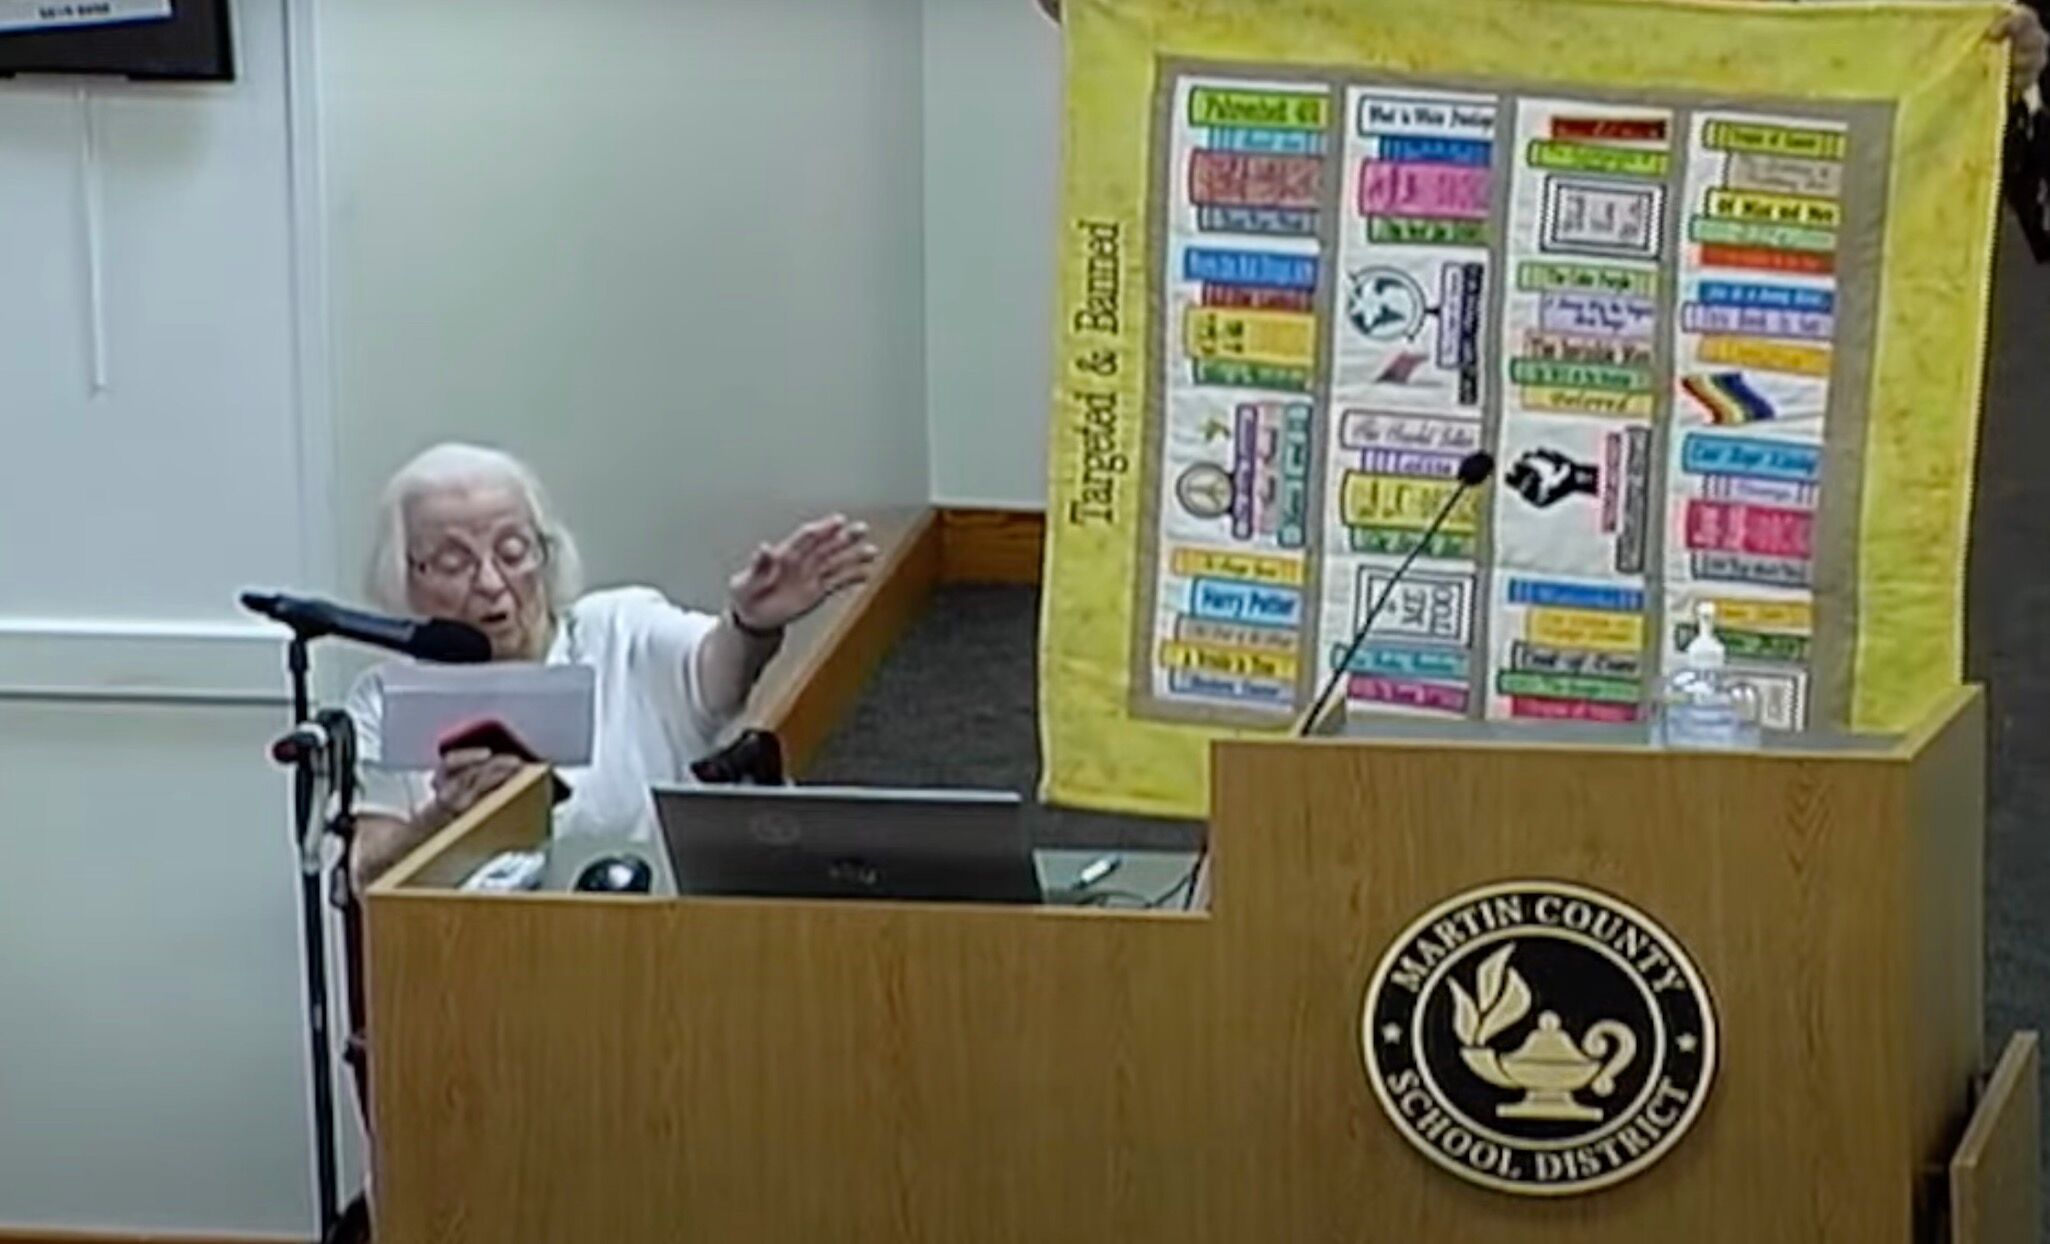 100-year-old Grace Linn speaks before Florida school board and shows off her quilt of banned books